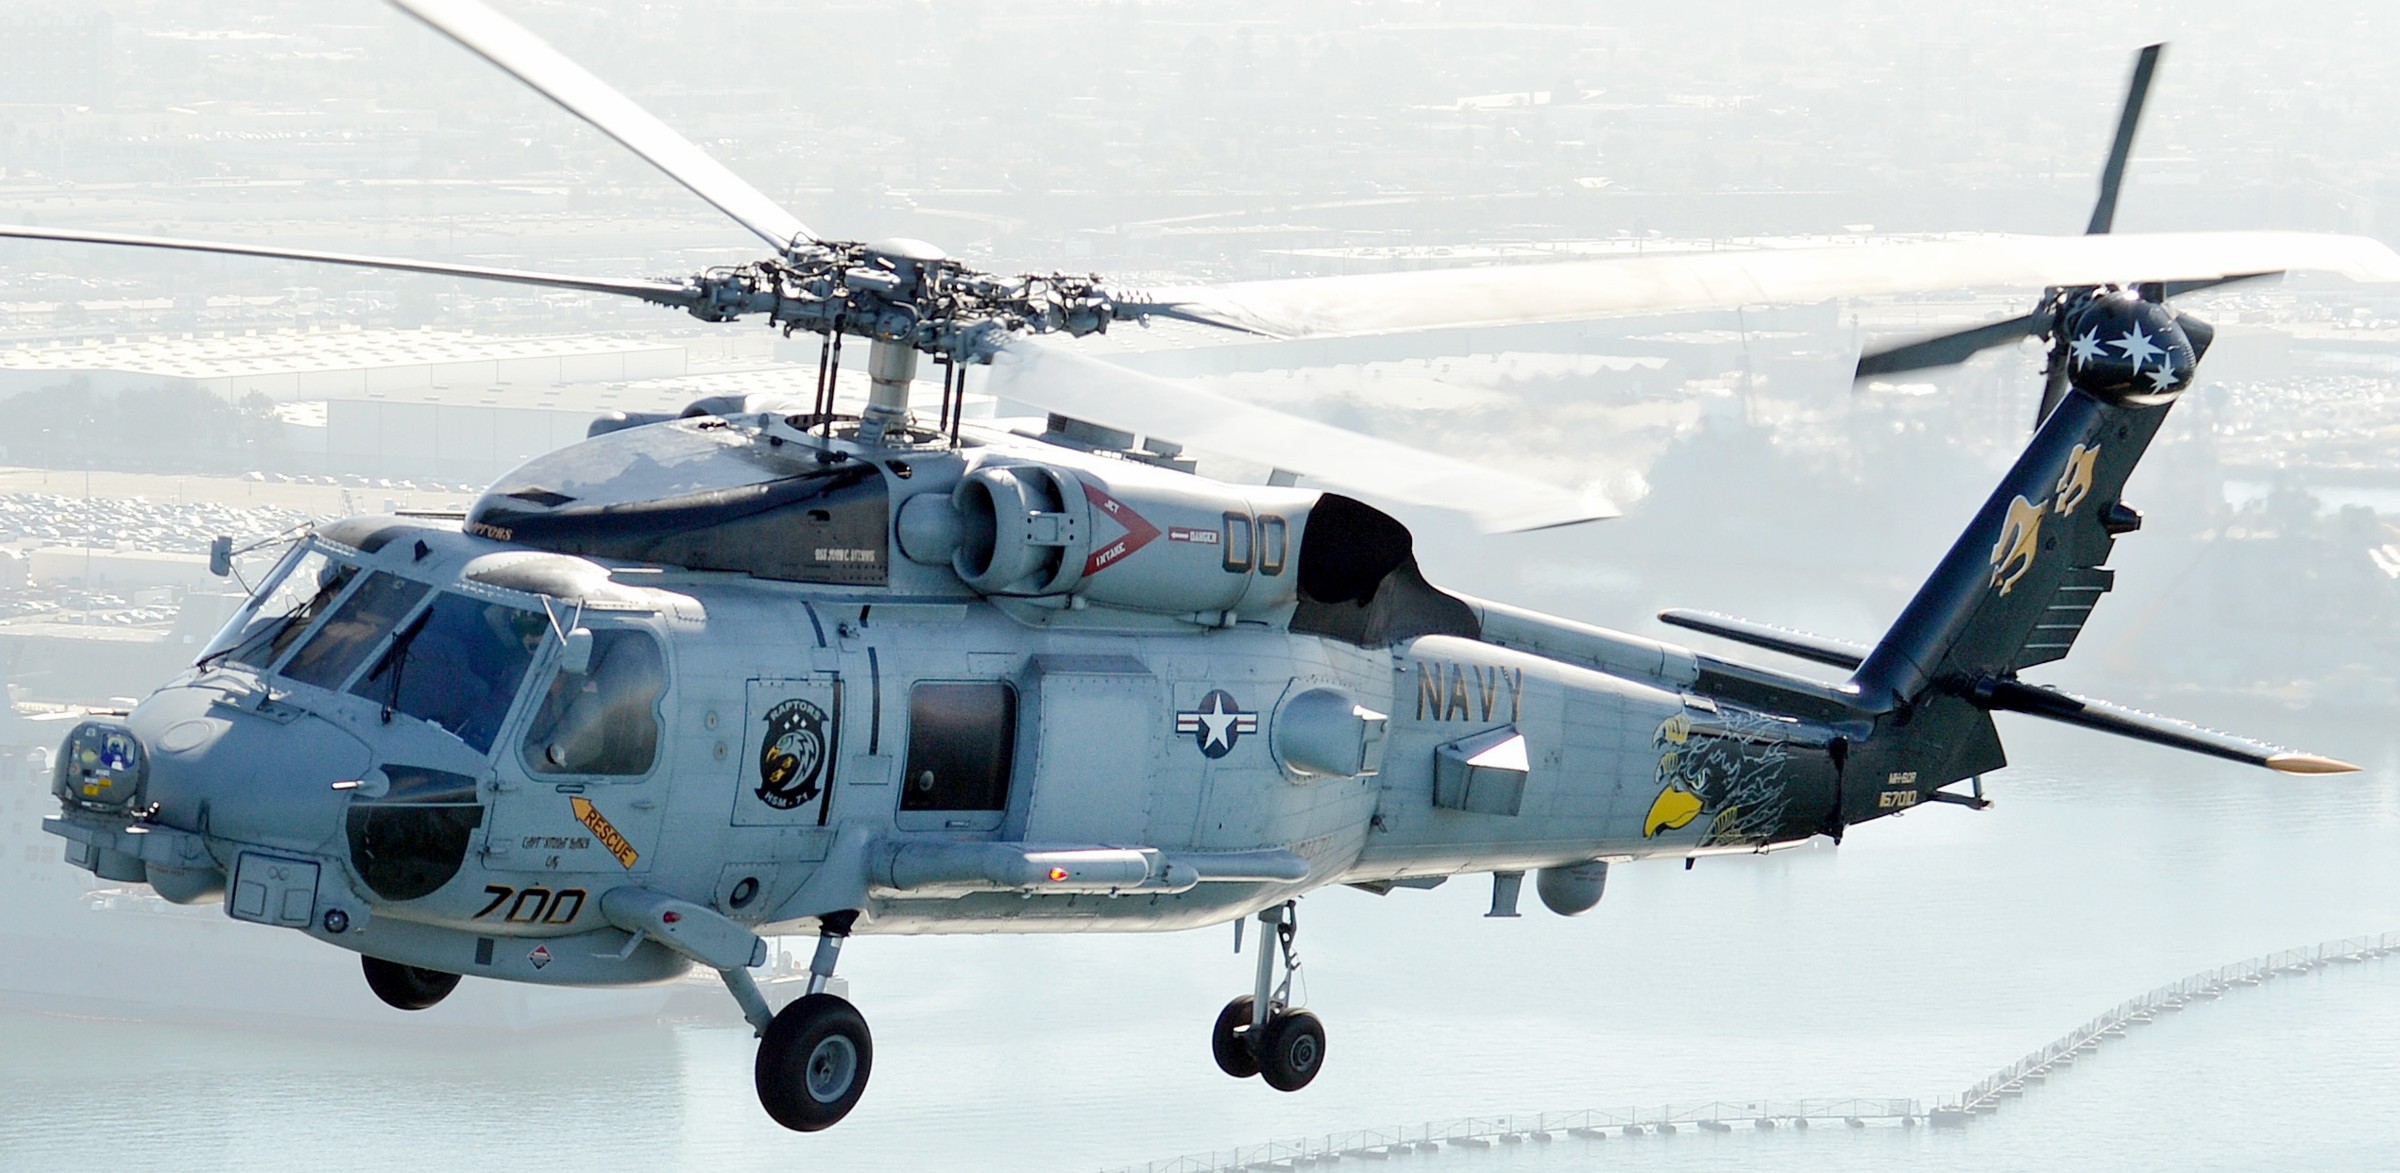 hsm-71 raptors helicopter maritime strike squadron mh-60r seahawk navy 2014 67